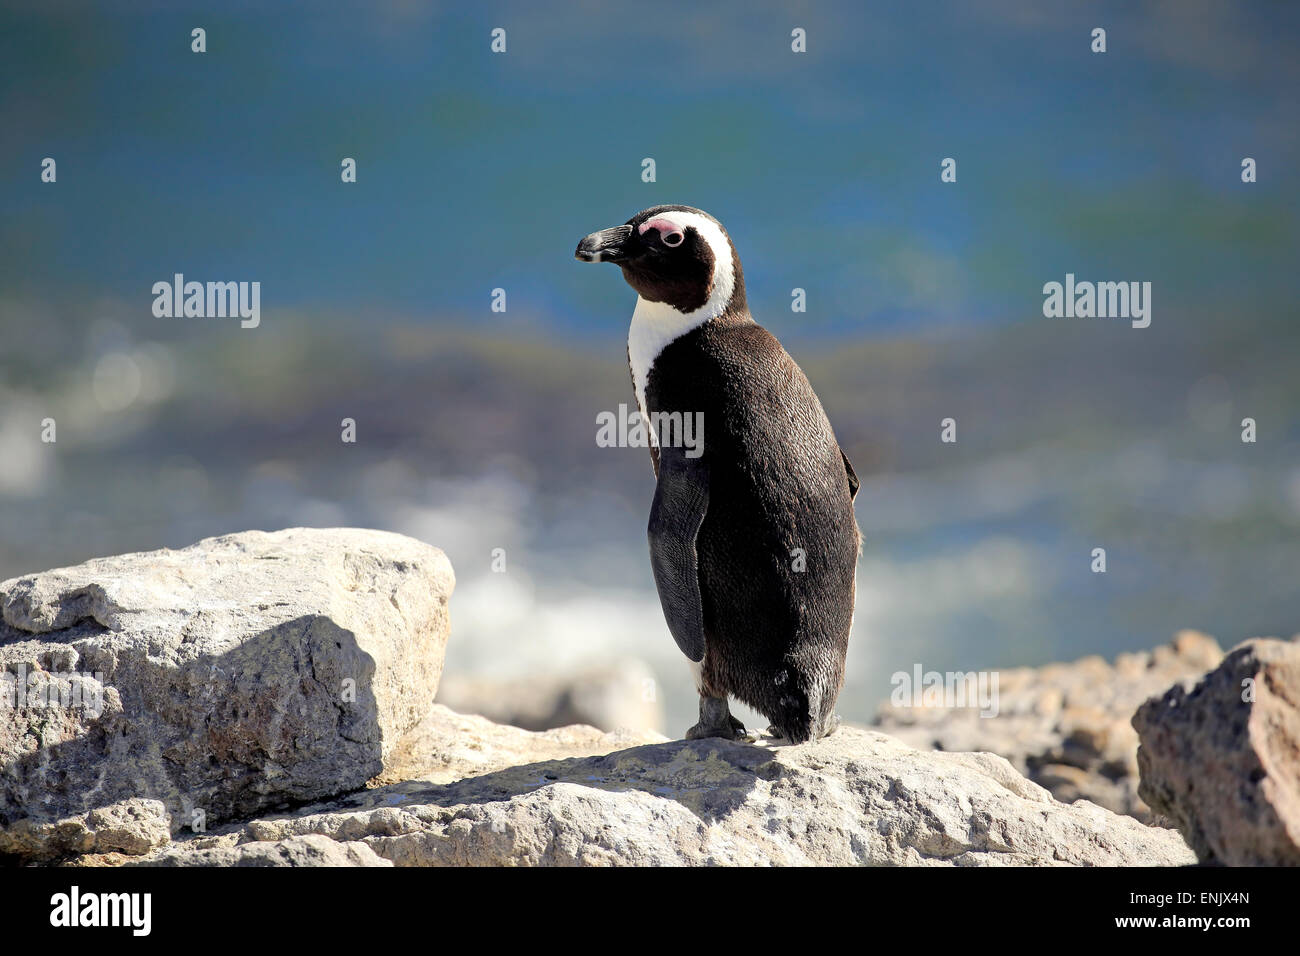 African Penguin (Spheniscus demersus), adult, standing on rock, Stony Point, Betty's Bay, Western Cape, South Africa Stock Photo